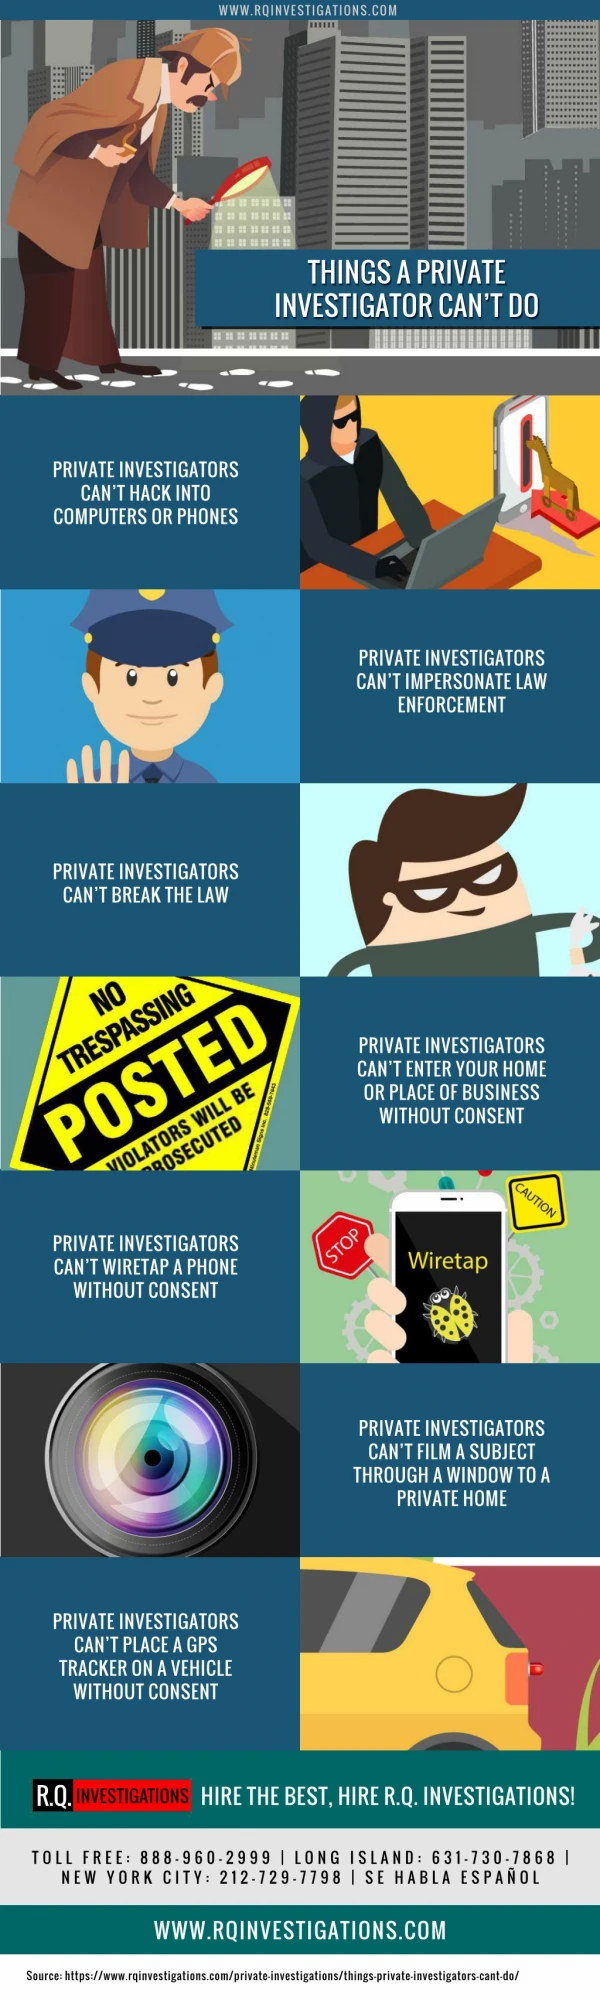 Things A Private Investigator Can't Do